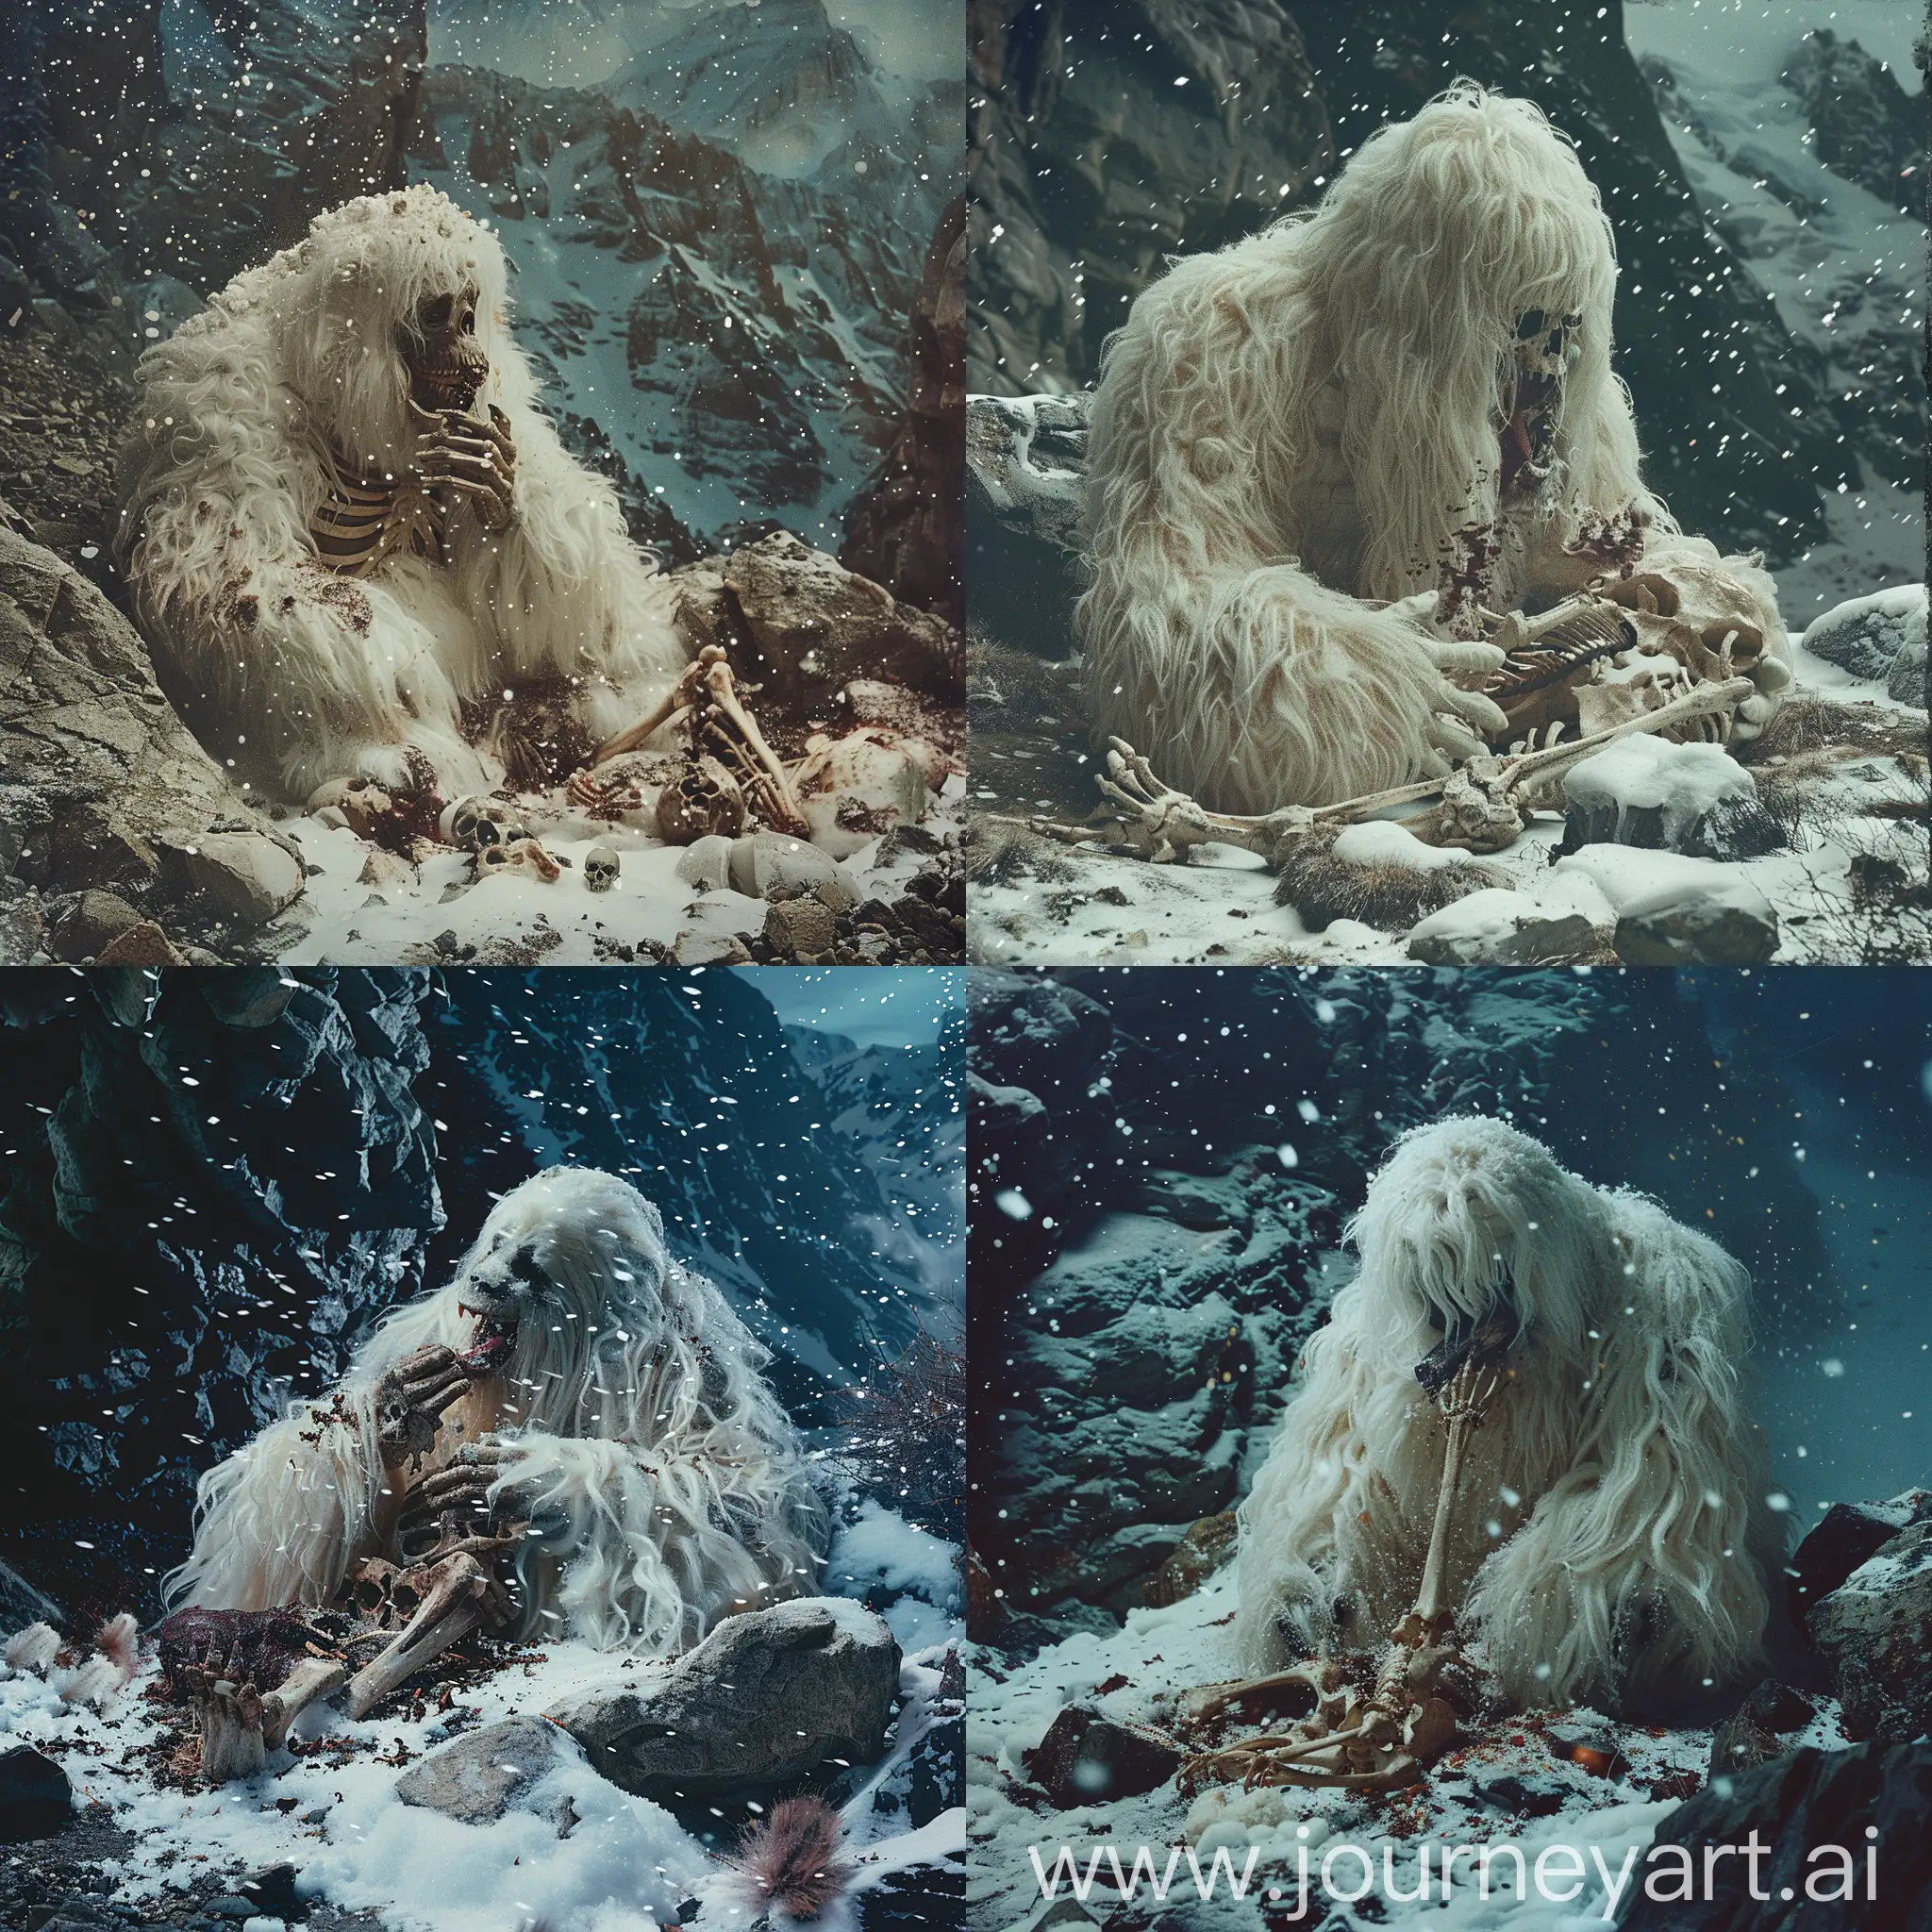 Yeti, Abominable Snowman, long white fur, snowy environment, cave, snow-covered rock, eating skeletal remains, bones, flesh, dark setting, snowflakes falling, mountains background, 80s vibe, retro colors, film grain, vintage photo filter